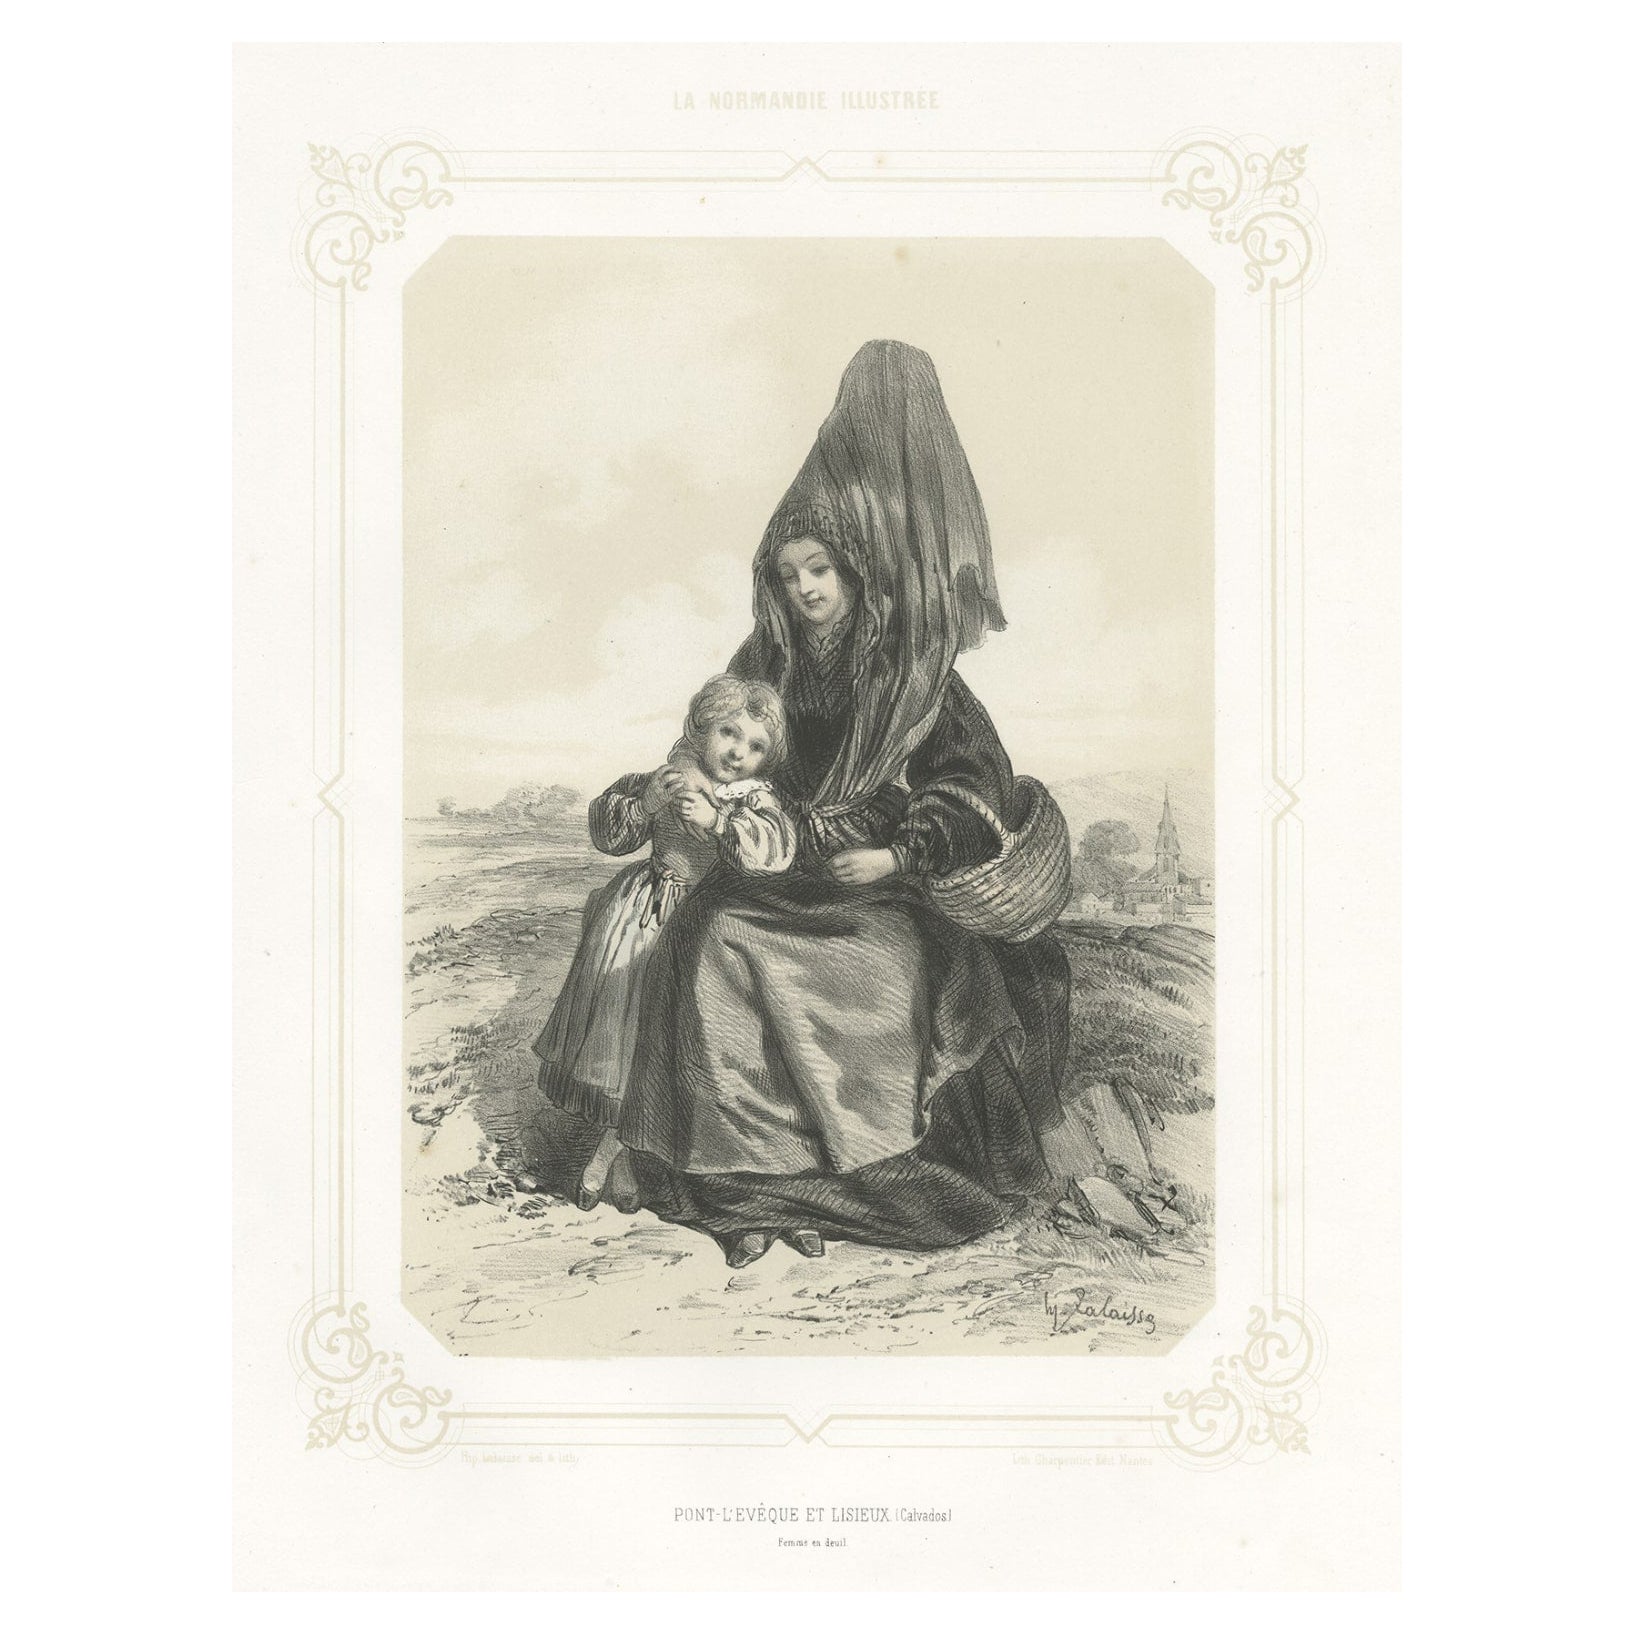 Antique Print of Mourning Woman from the Region of Lisieux in France, 1852